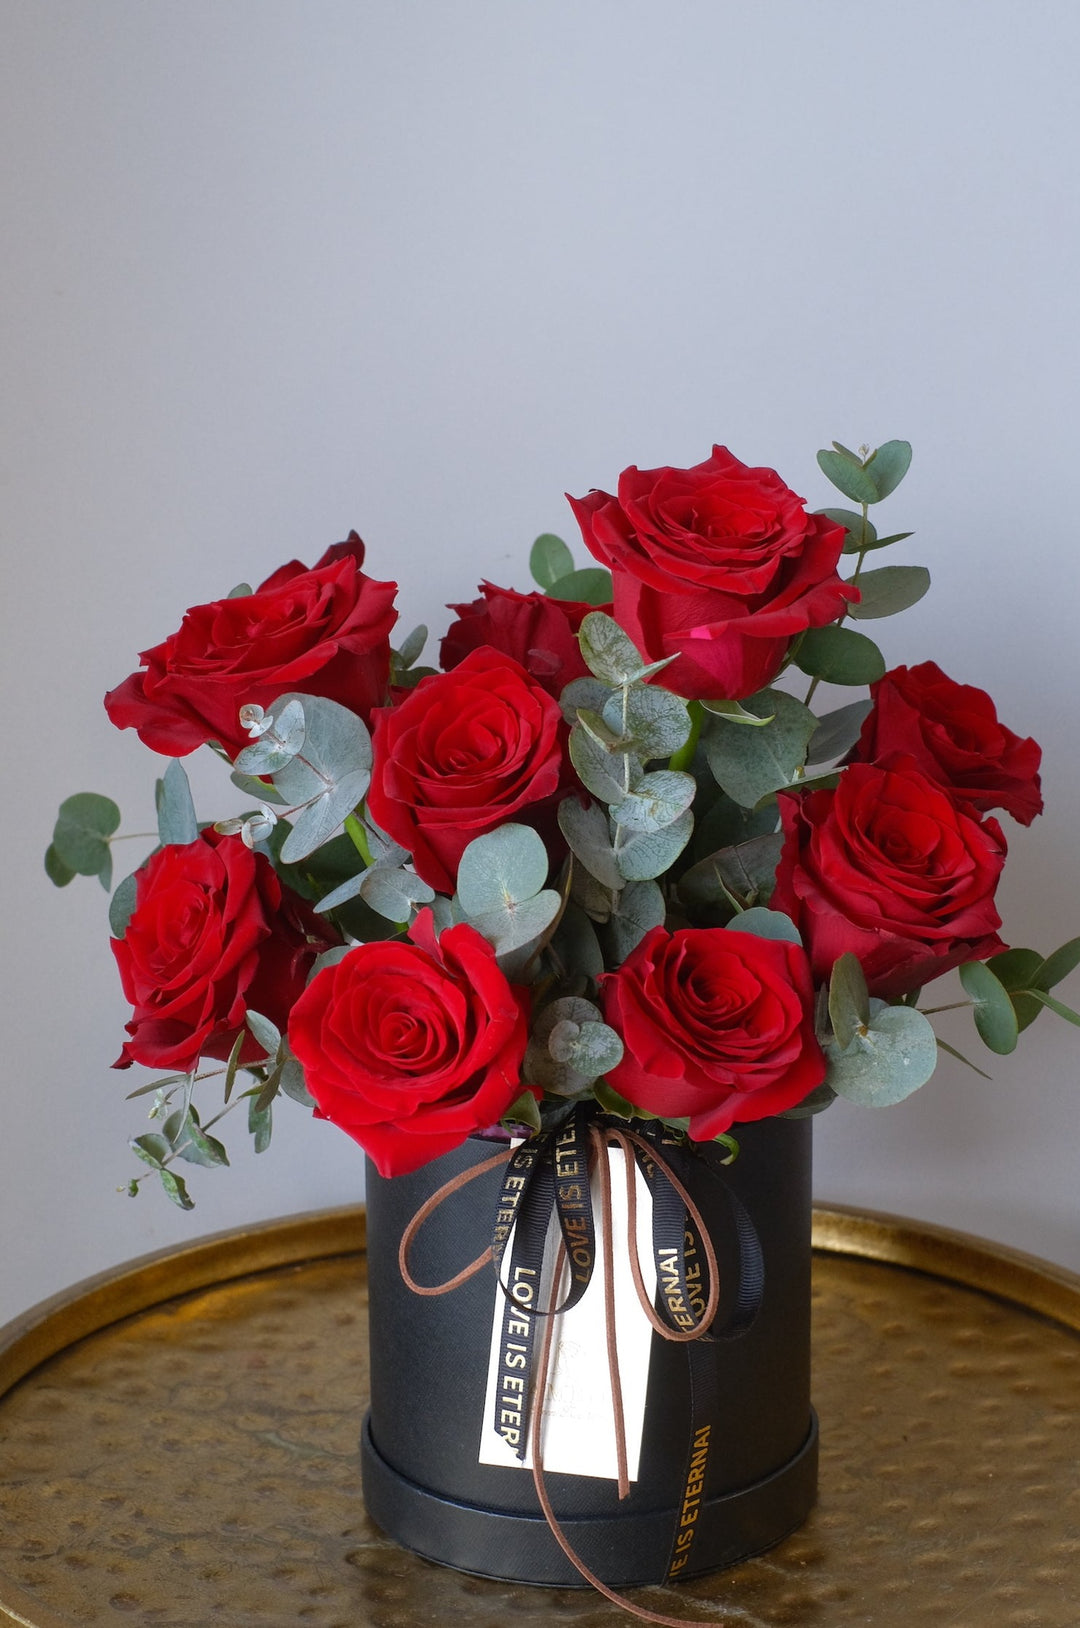 Stunning composition of 10 red luxury roses in elegant black box for valentine's flower delivery.